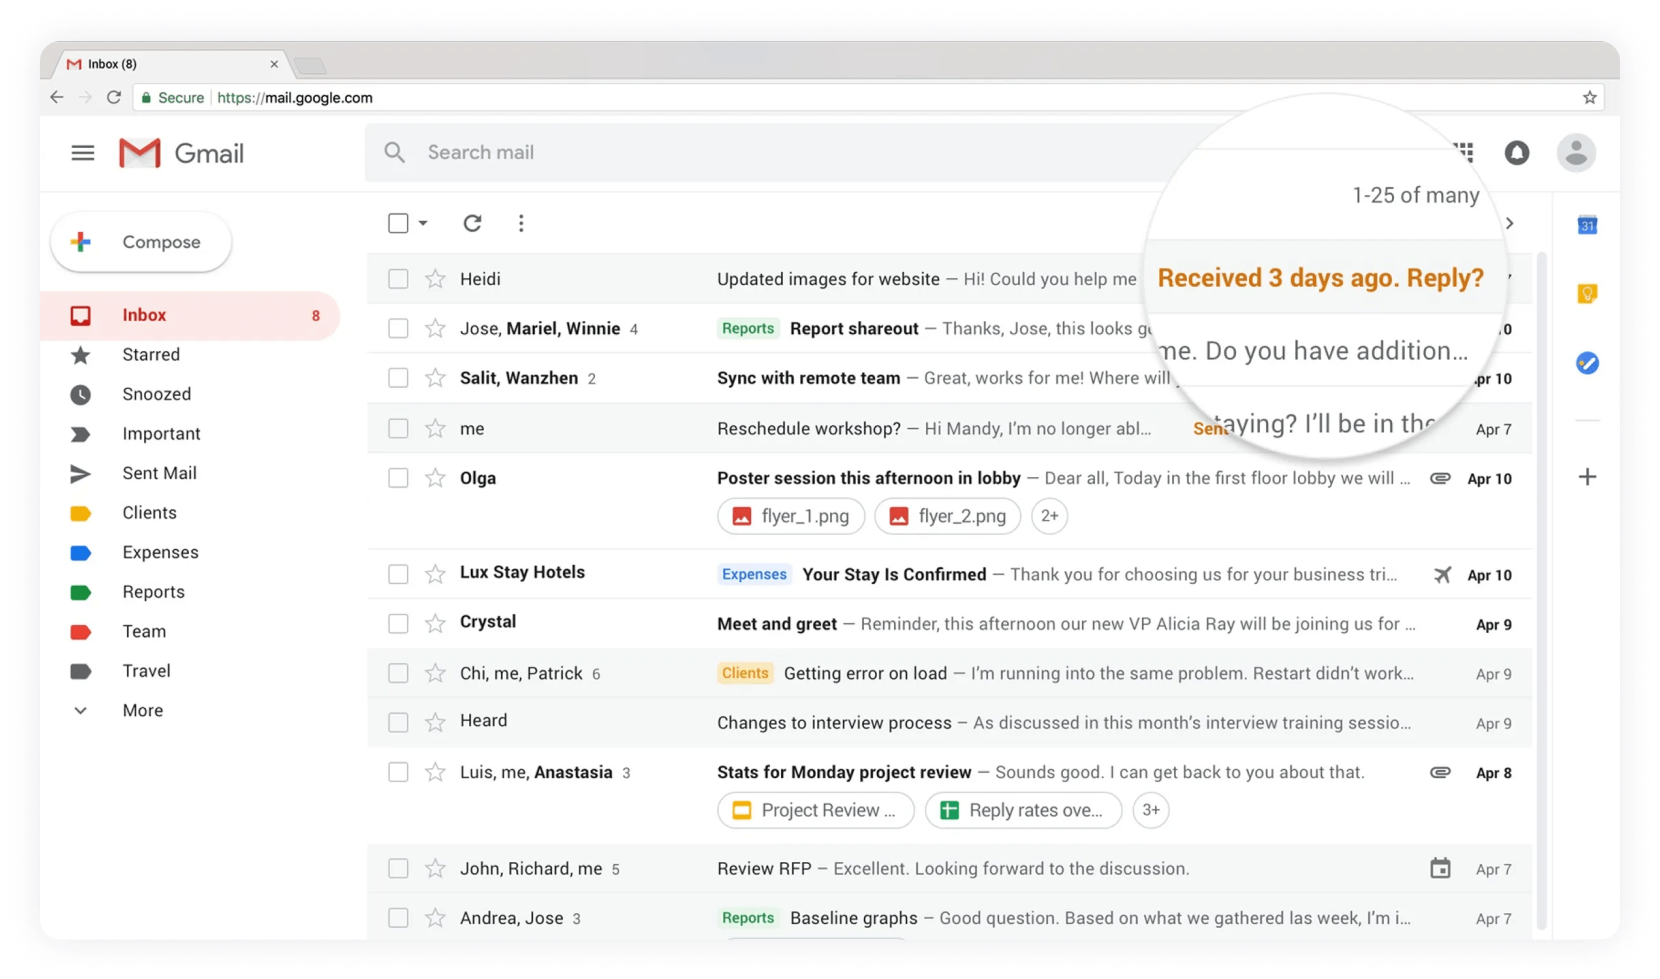 Gmail offers a few SaneBox features